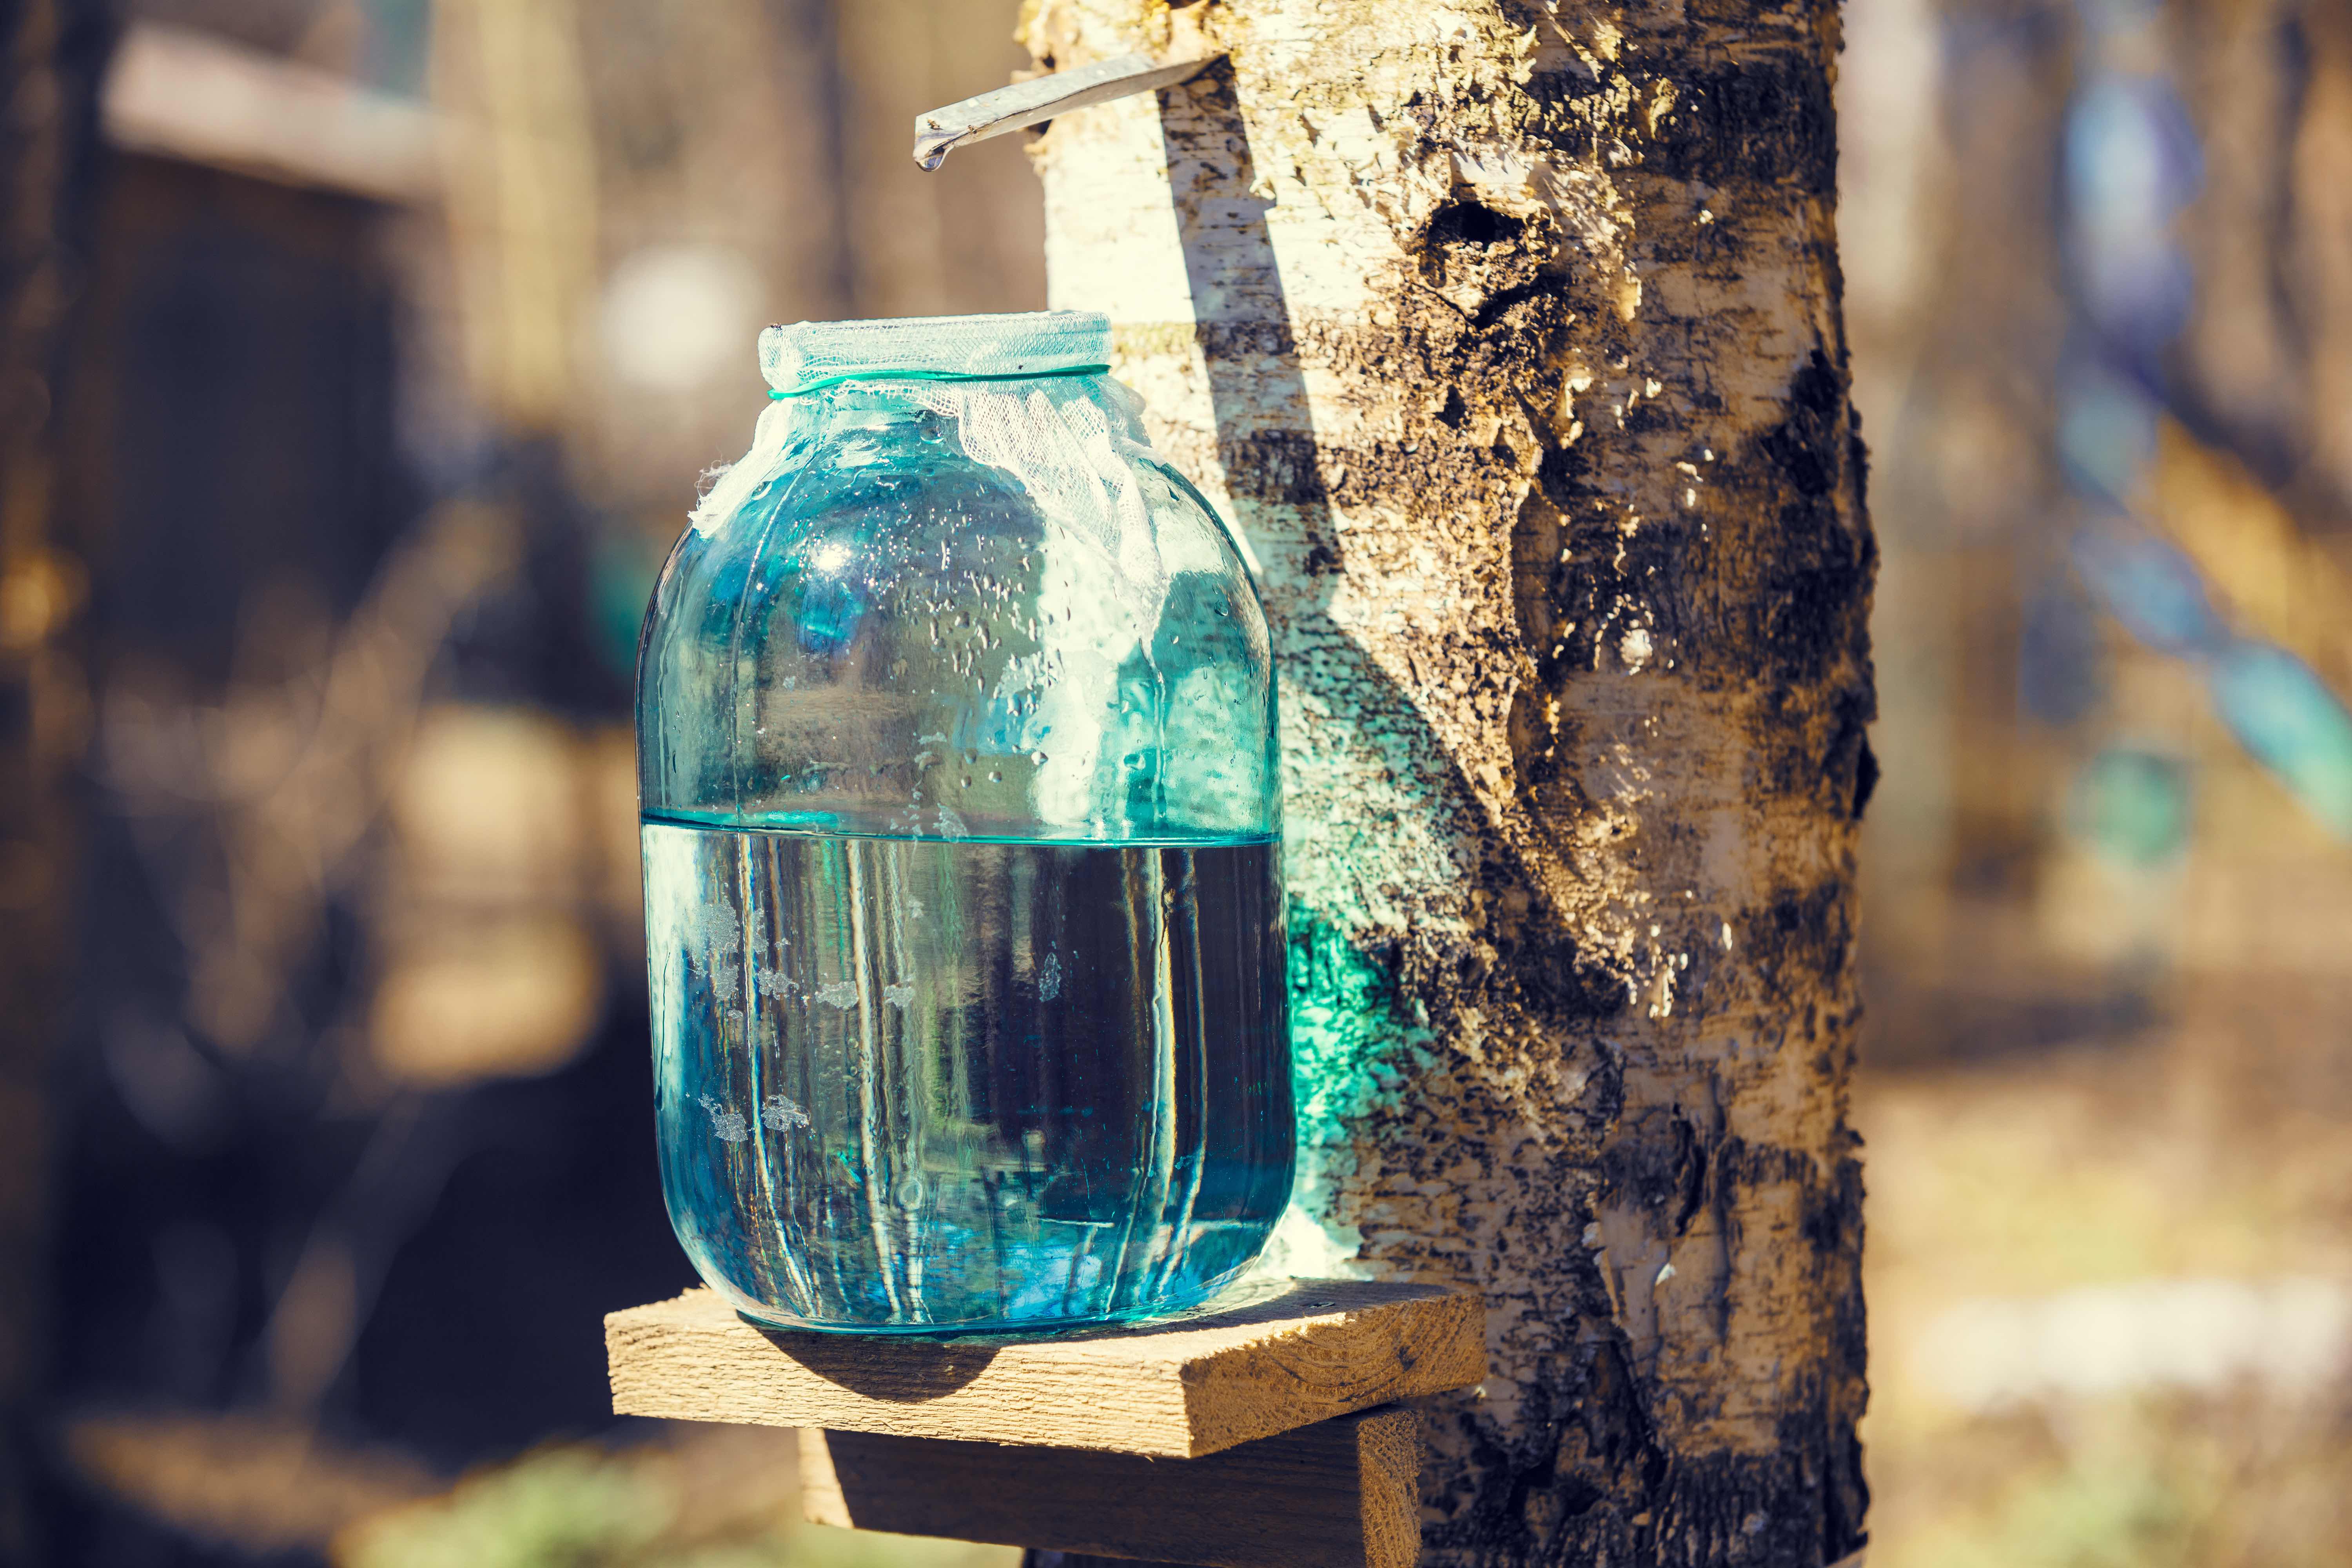 Production of birch sap in a glass jar in the forest.